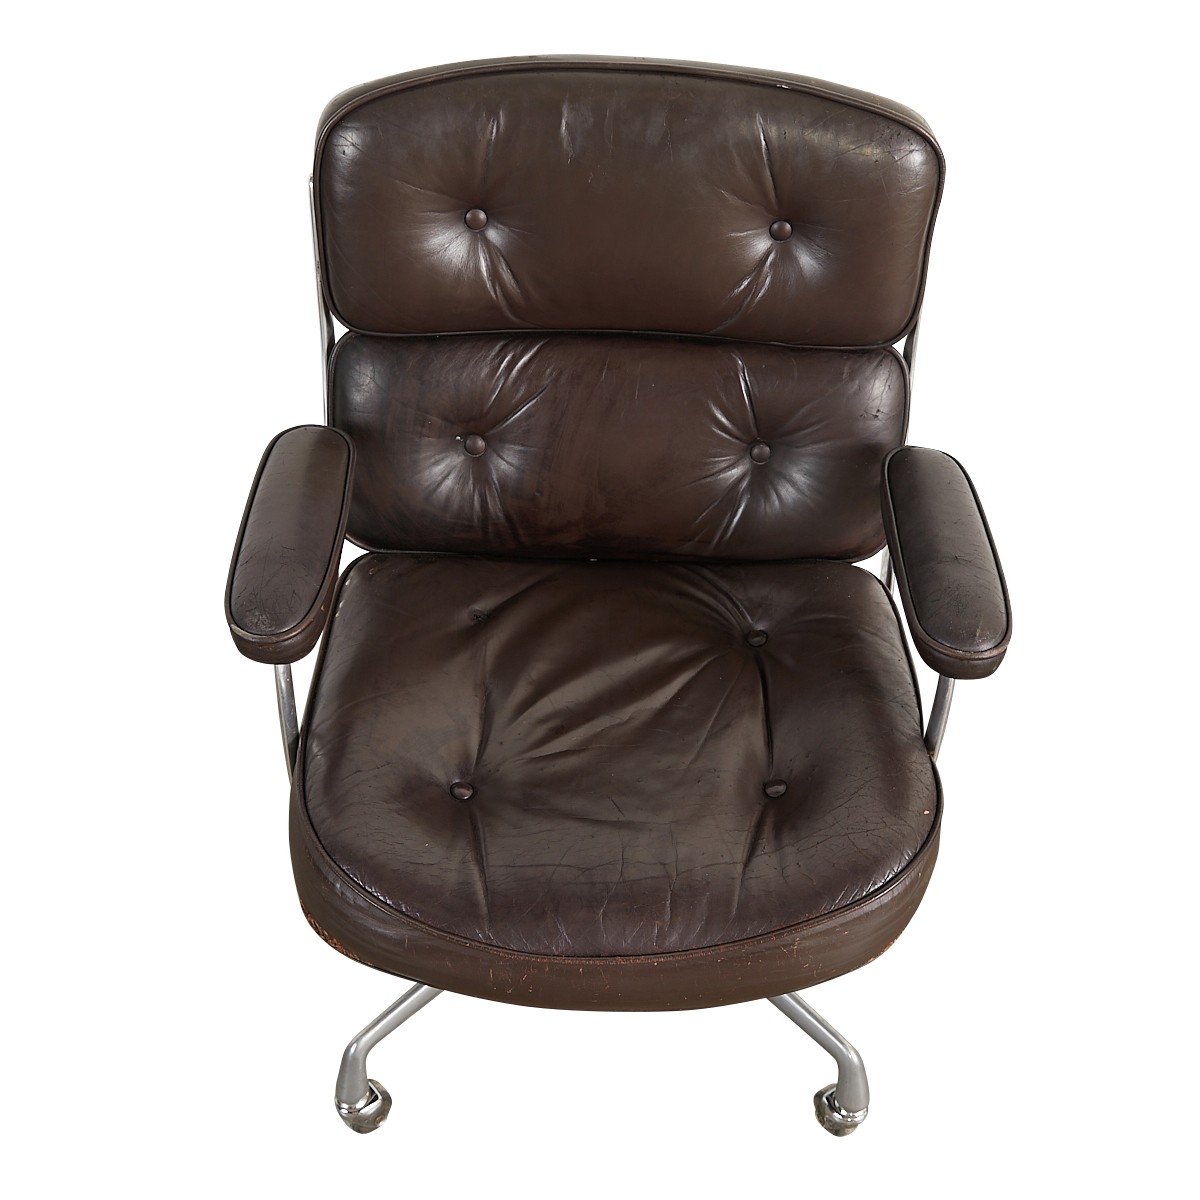 Eames Herman Miller Time Life Chair 1st Gen. - Image 12 of 14